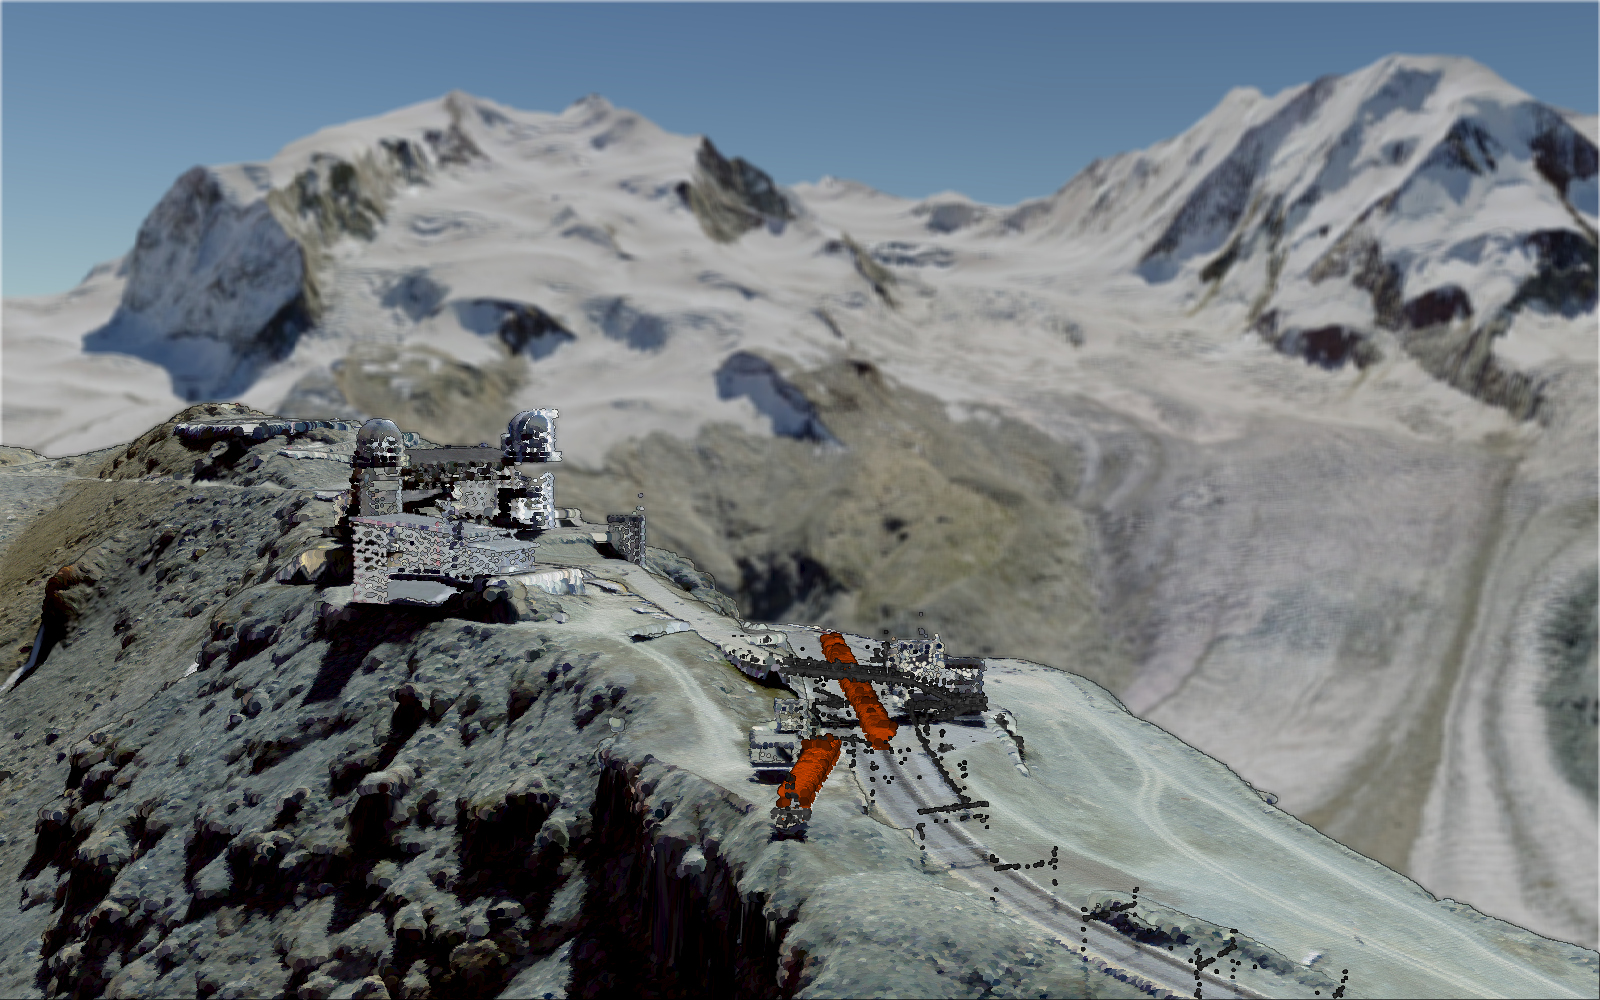 The picture shows the Gornergrat observatory with the Gornergrat railway station and the Monte Rosa massif in the background.